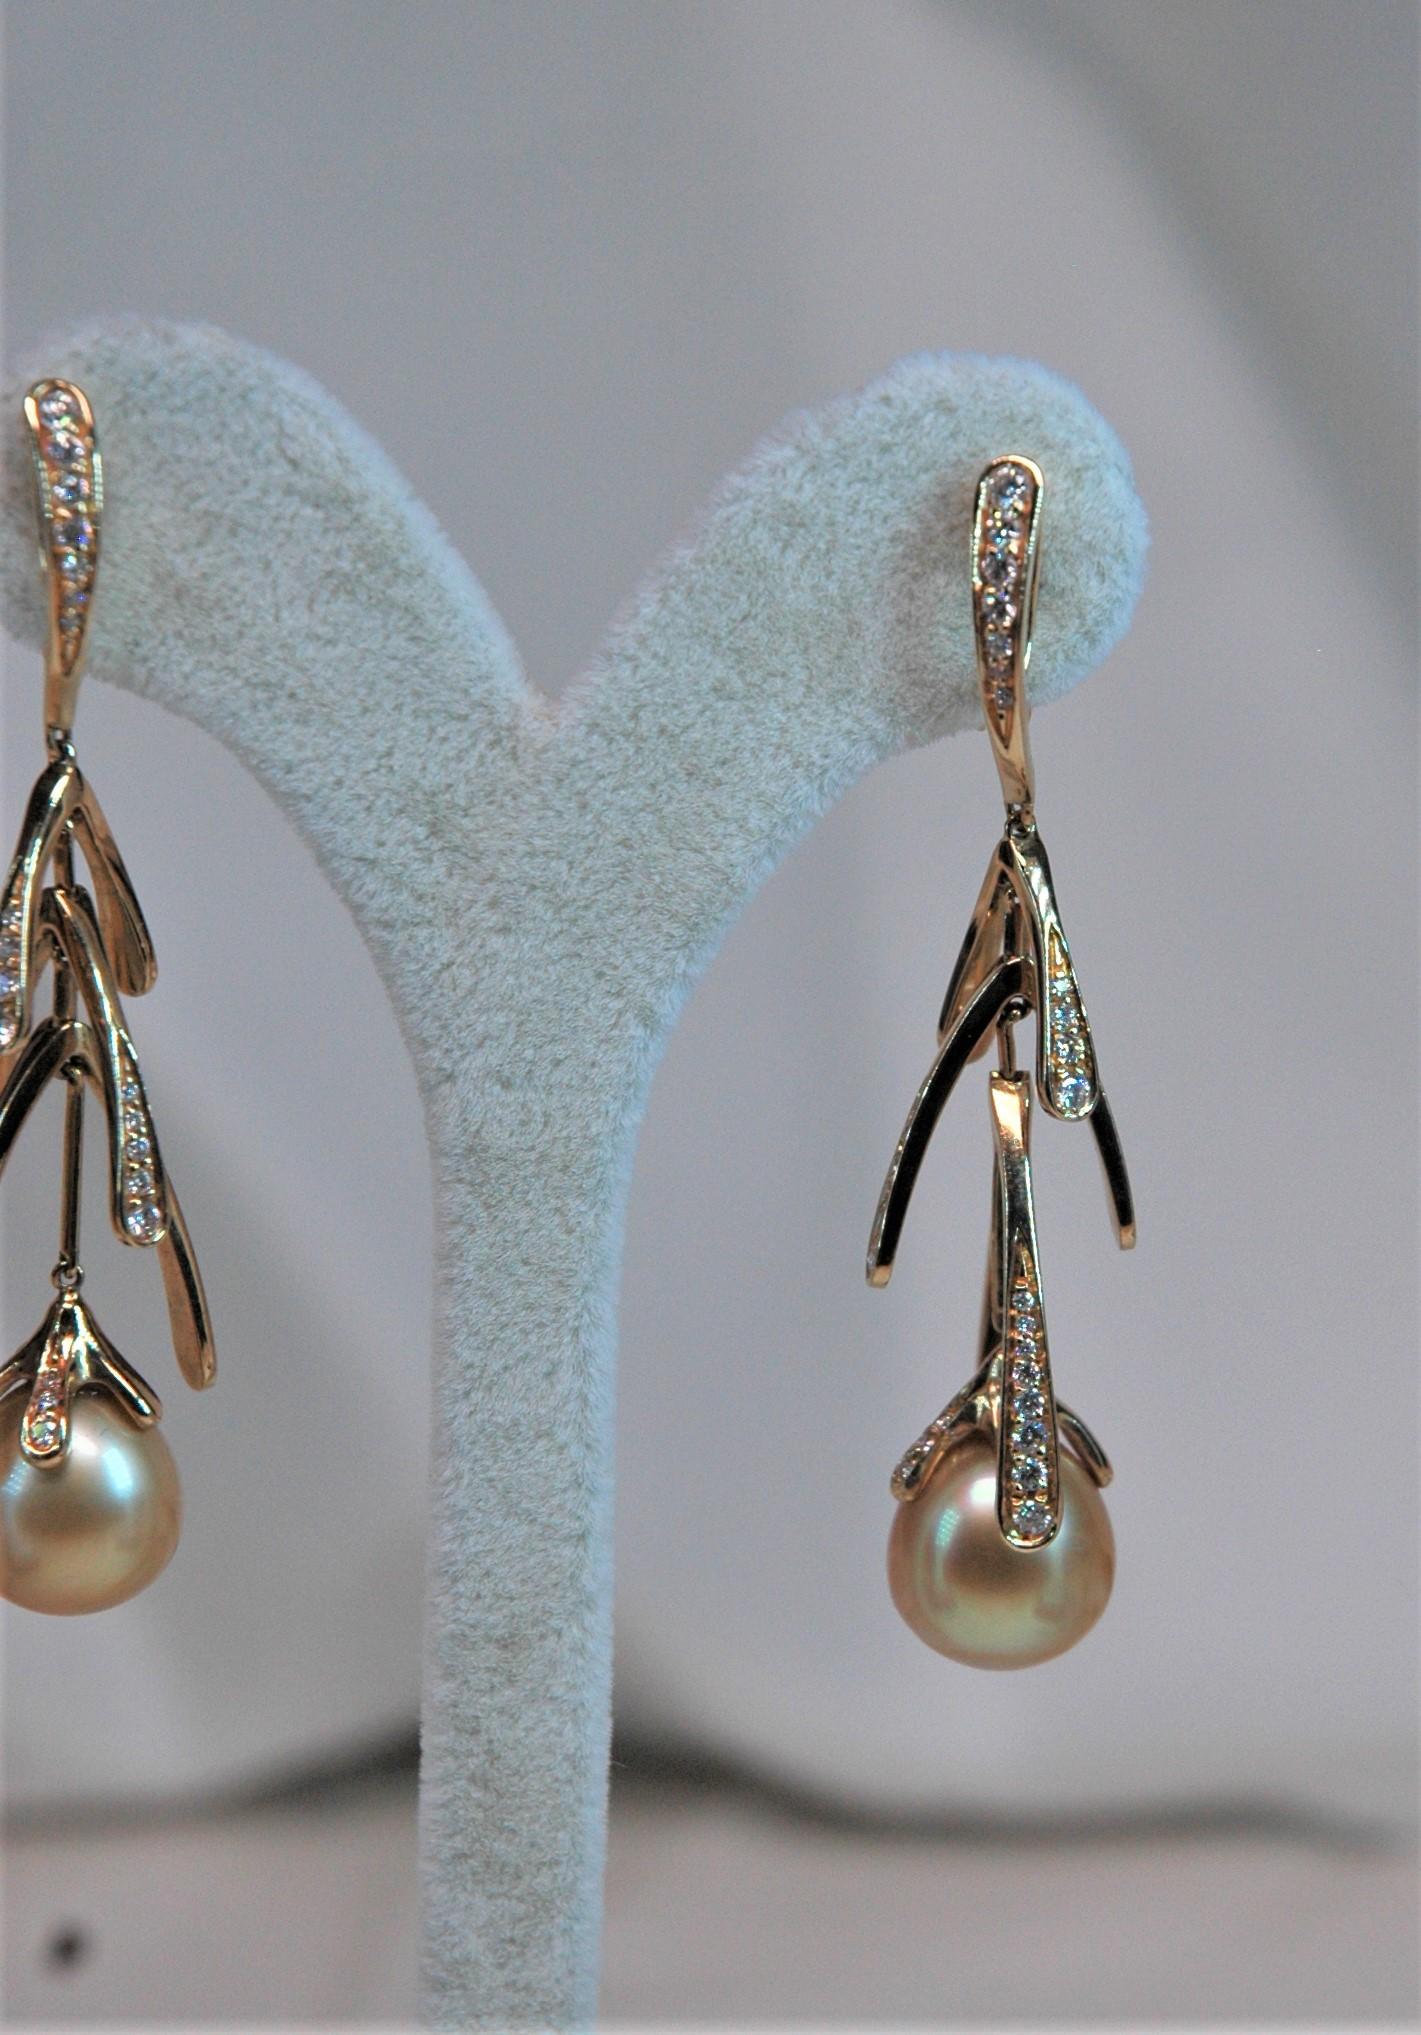 Brilliant Cut 0.87 Carats Diamonds, Gold Pearls, Yellow Gold Dangle Earrings For Sale